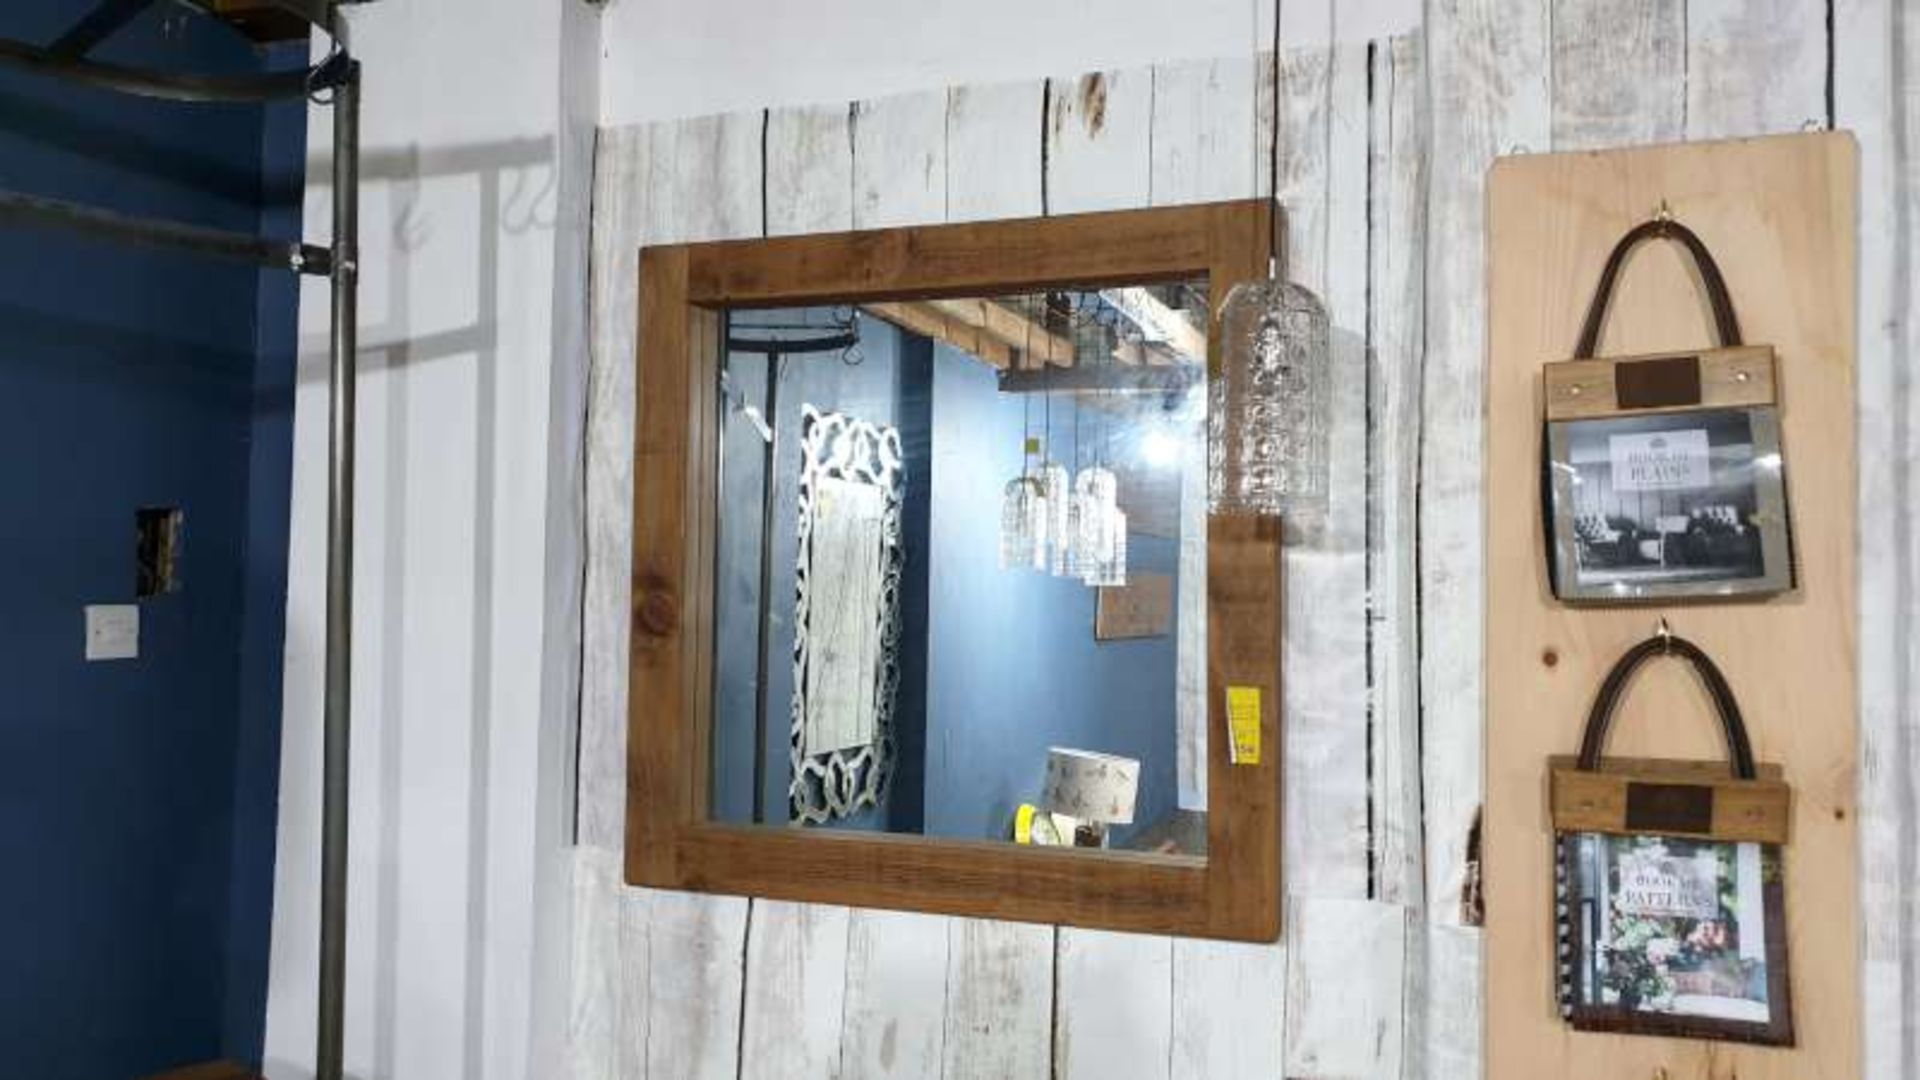 LOT CONTAINING XANA CEILING LIGHT AND A 100 X 100 PLANK WALL MIRROR TOTAL RRP 230.00